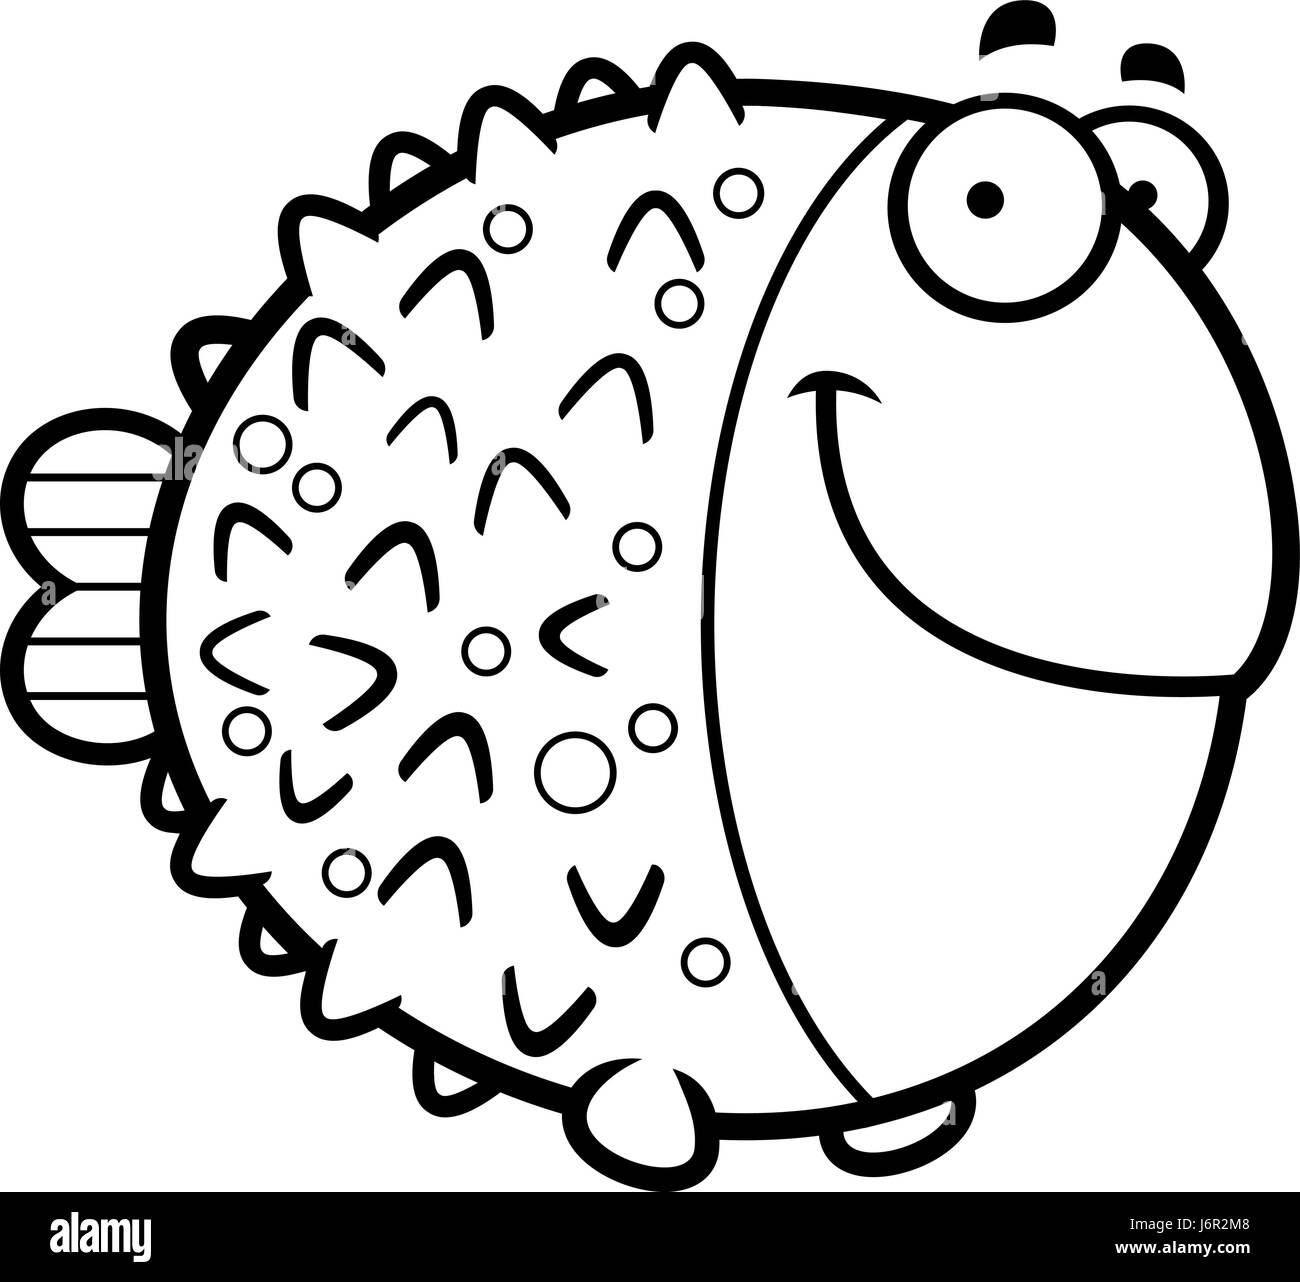 A cartoon illustration of a pufferfish happy and smiling. Stock Vector